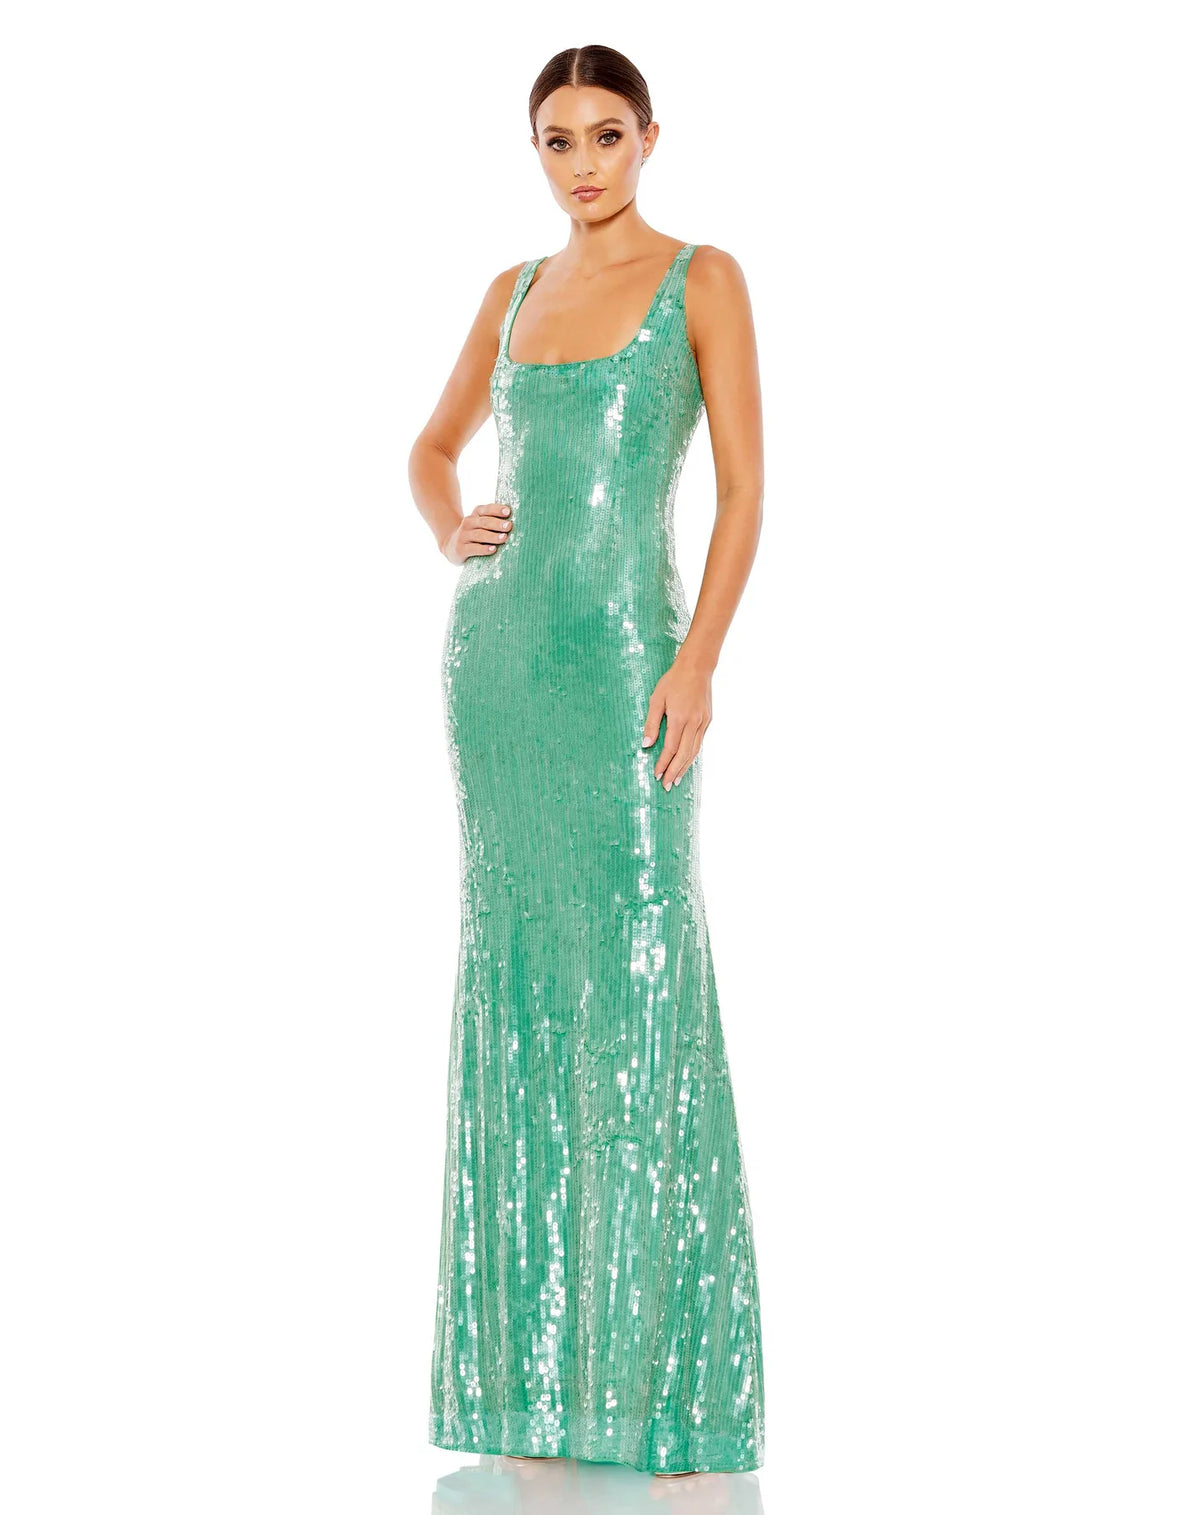 This elegant, floor-length, Mac Duggal, jade green sequin evening dress is a beautiful, long, simple and almost mermaid inspired evening gown. Coated in clear sequins that resemble sparkling water, crafted with bodycon, fitted material to hug your every curve and a low square neckline.This gown is perfect for proms, black-tie affairs, weddings and special events!